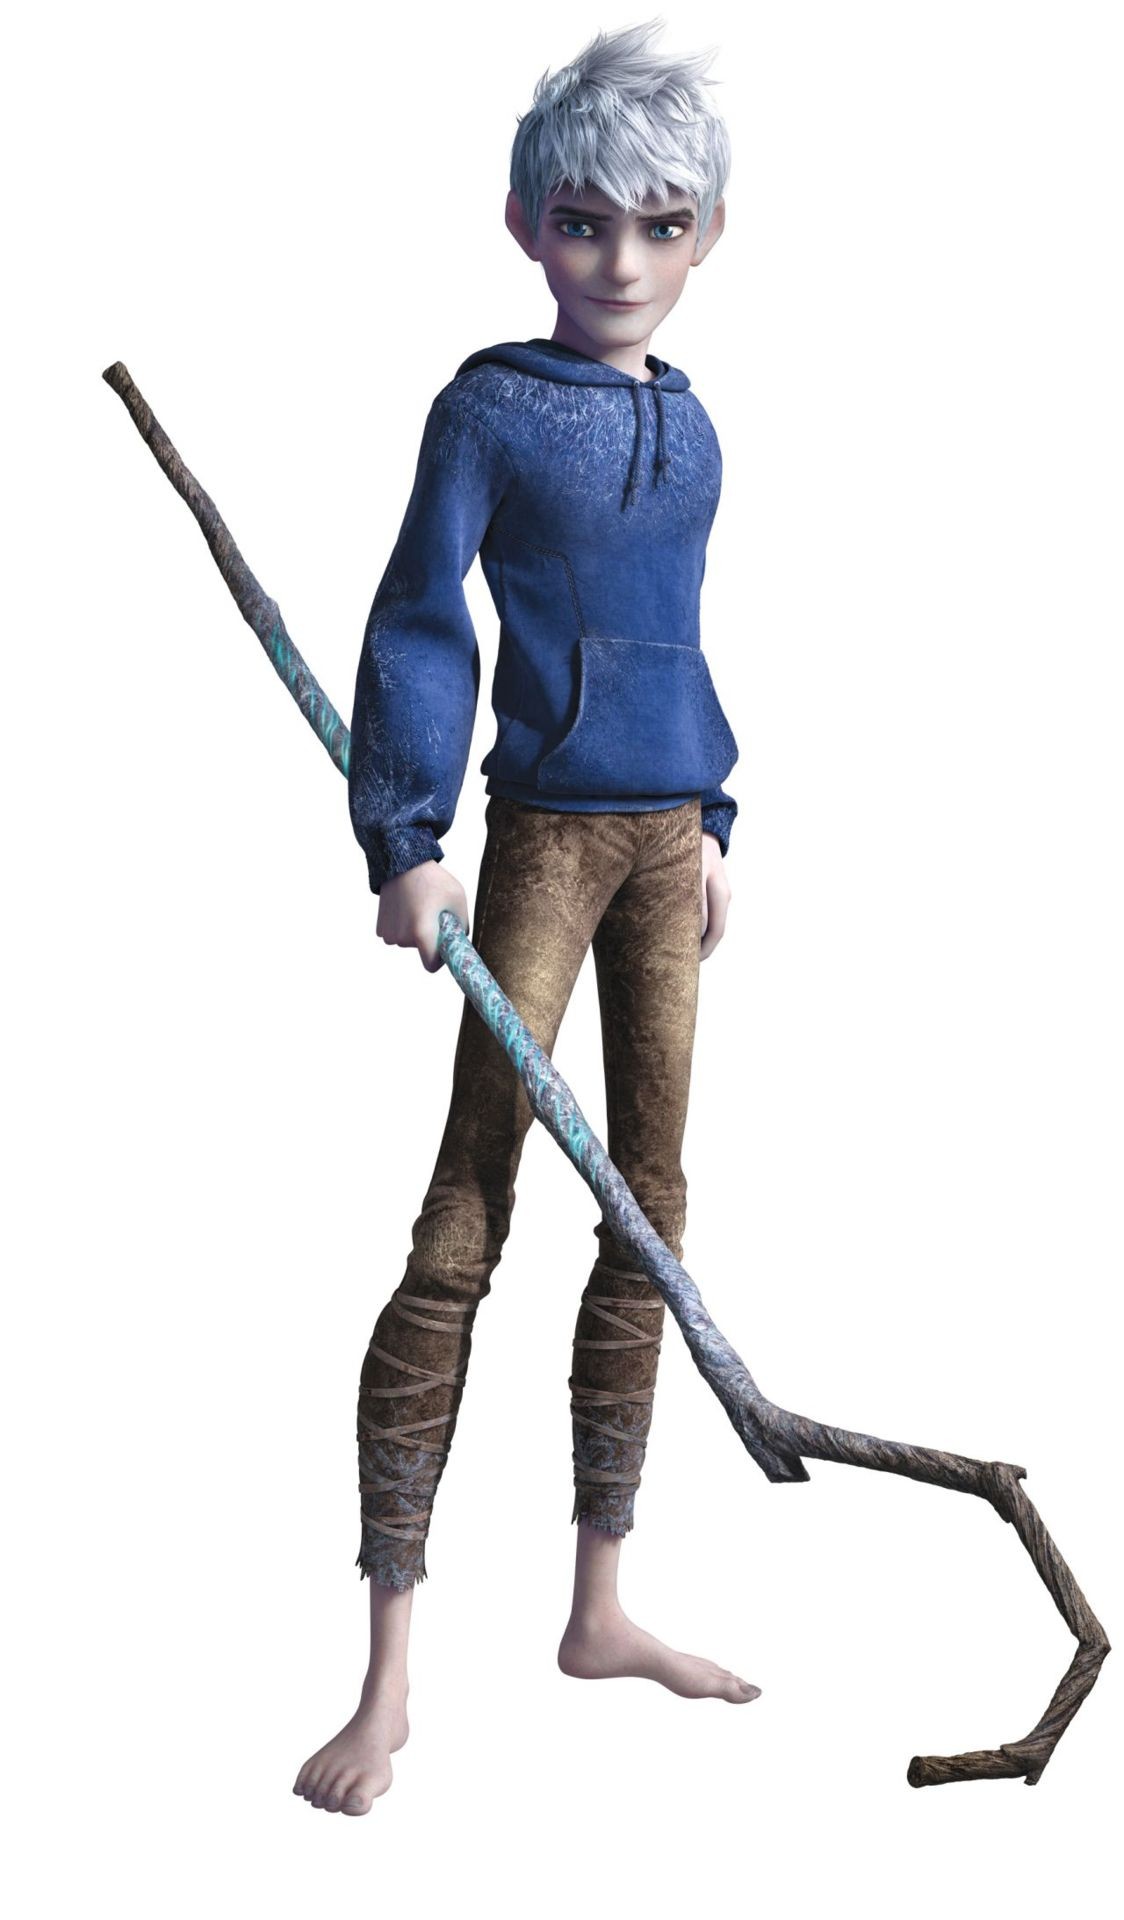 Jack Frost in DreamWorks Animation' Rise of the Guardians (2012)